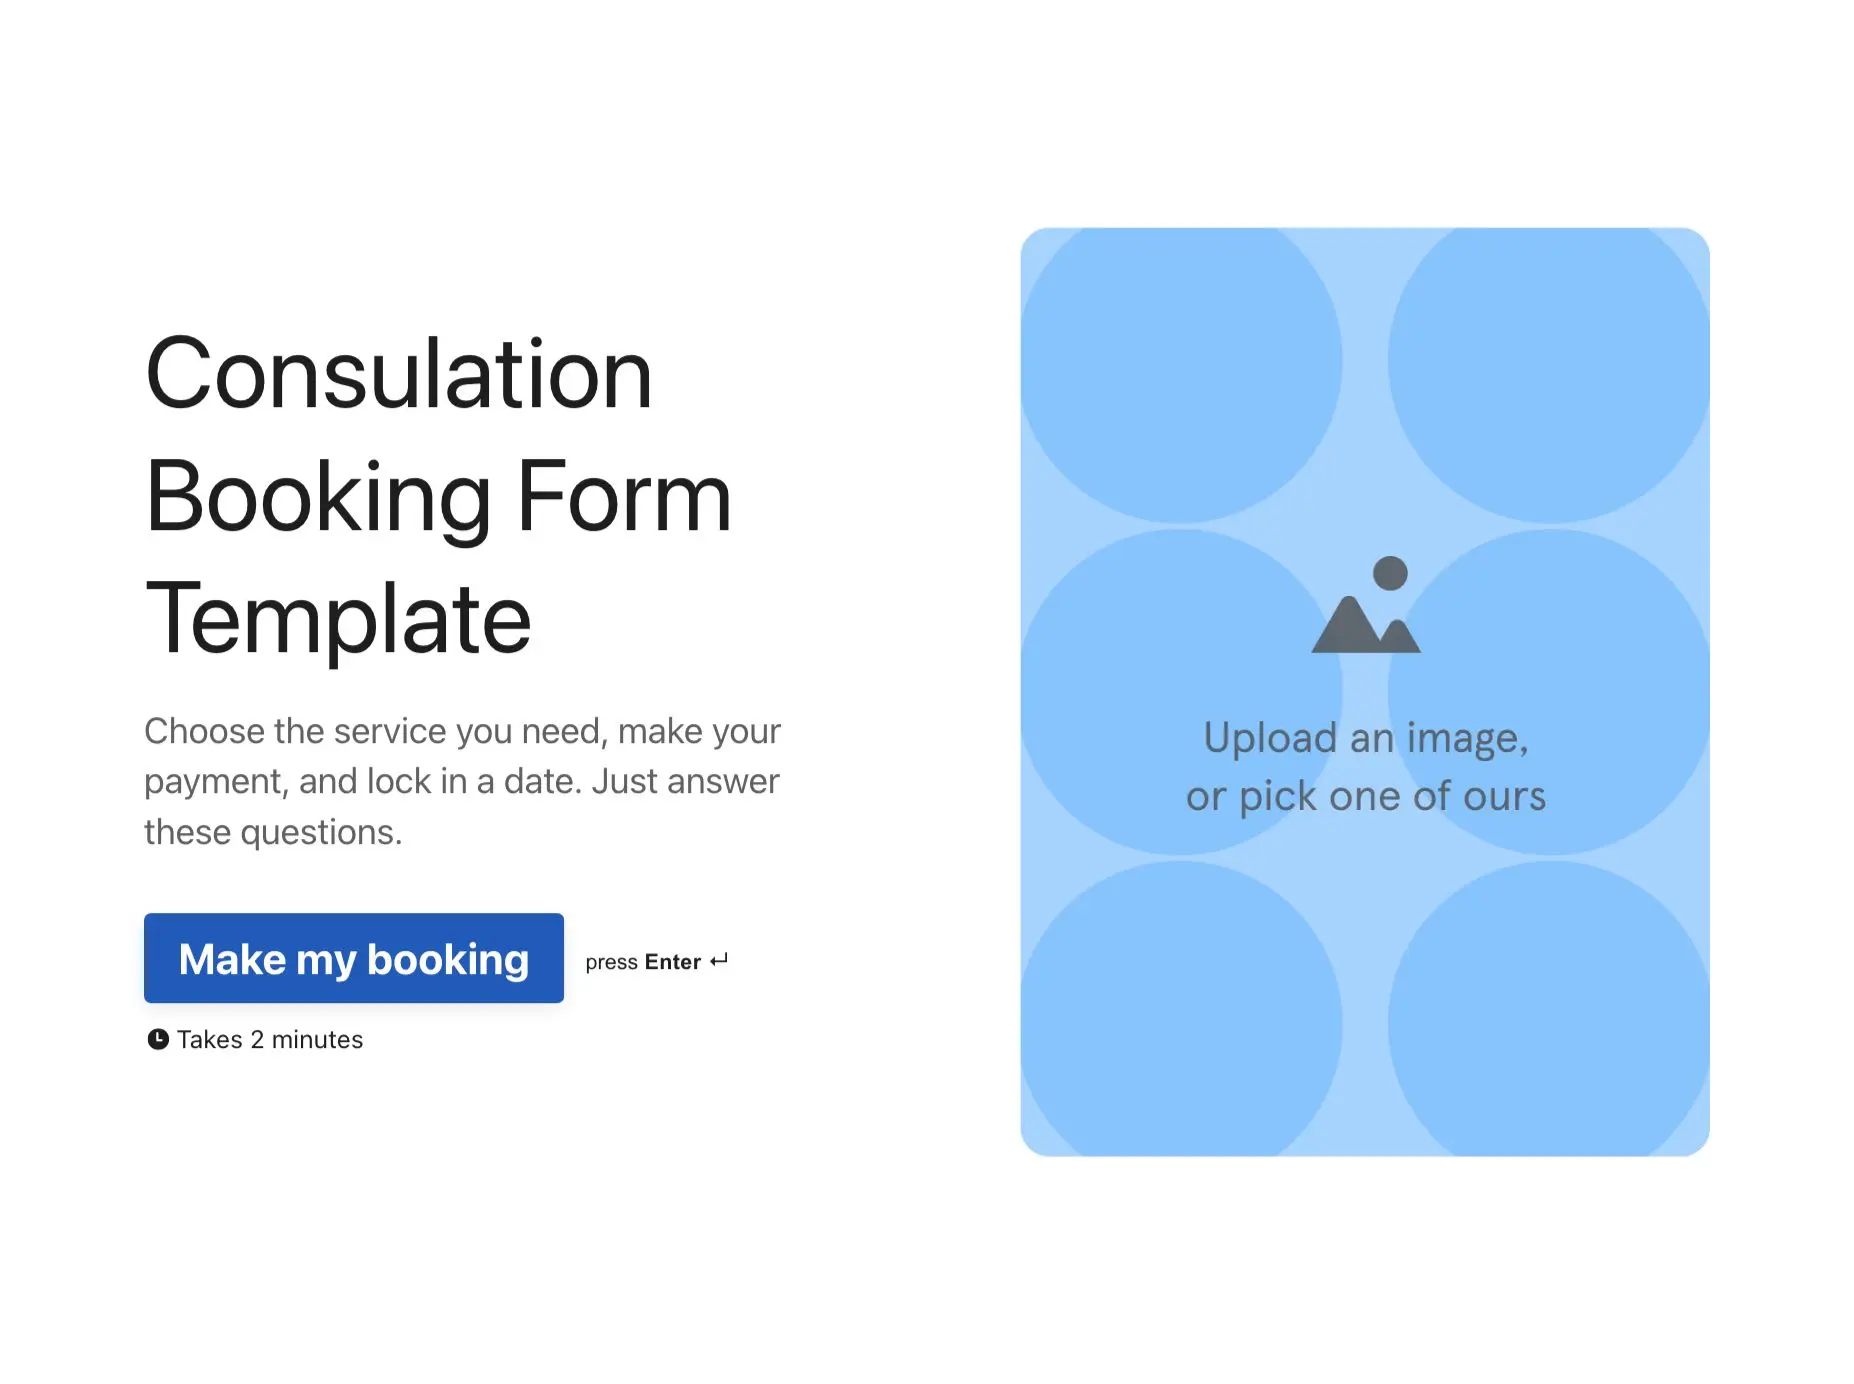 Consulation Booking Form Template Hero